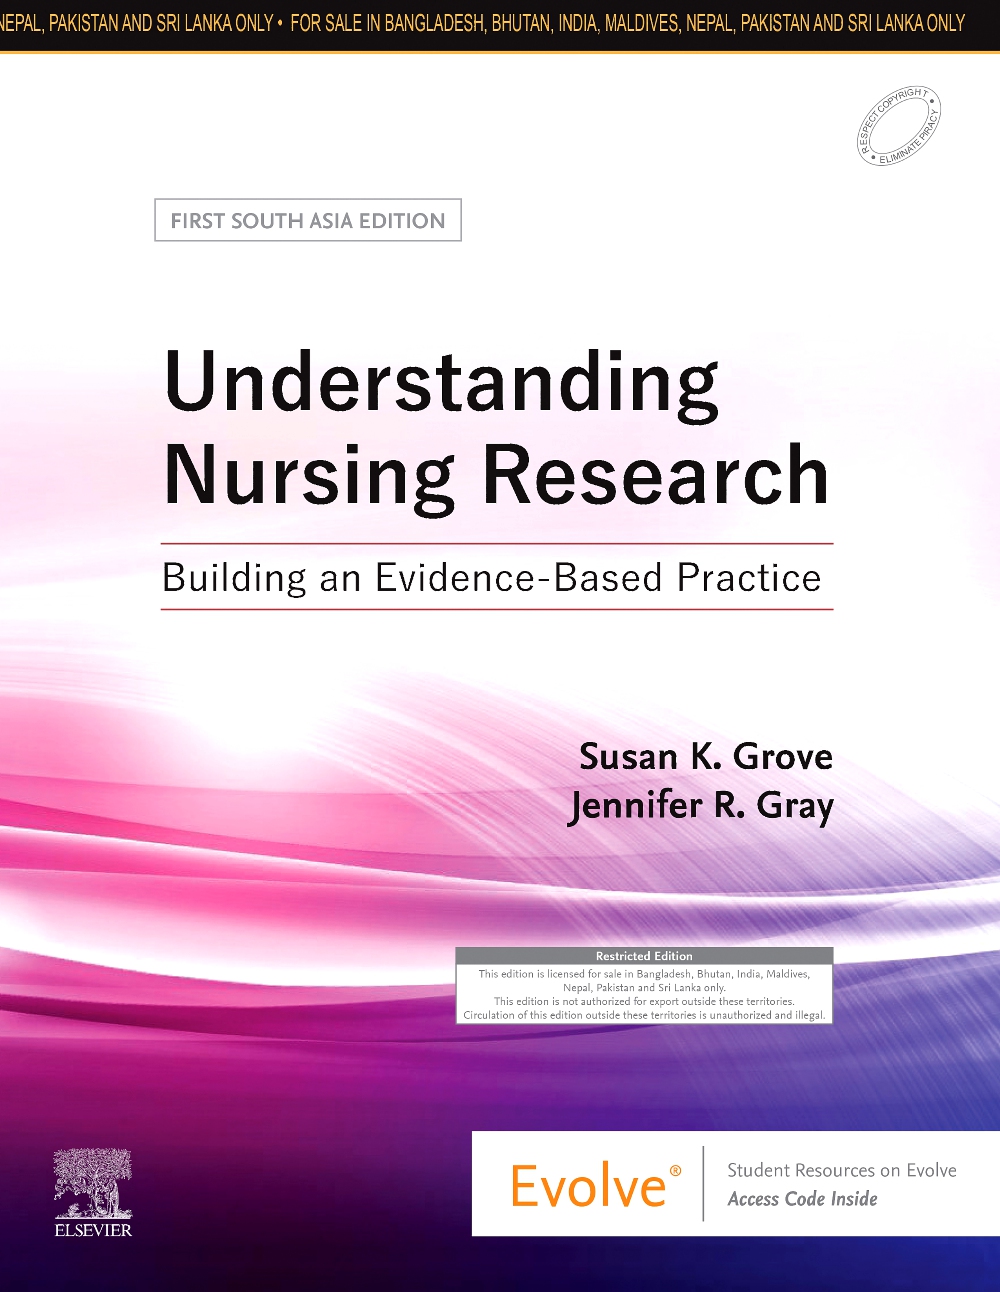 Understanding Nursing Research: Building An Evidence-Based Practice, First South Asia Edition